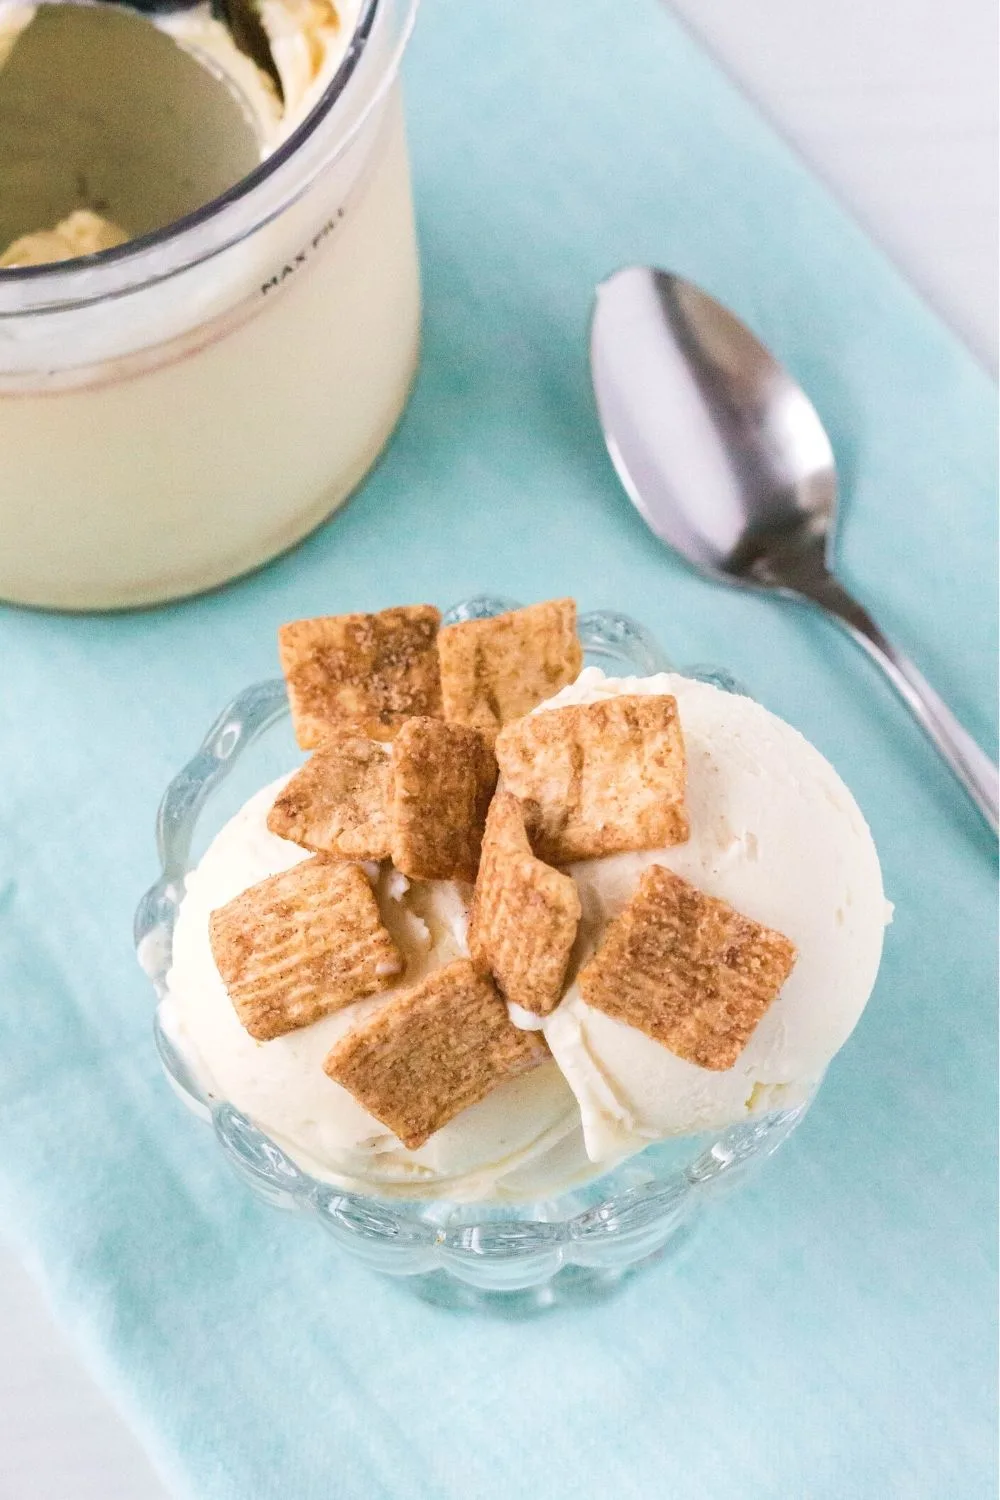 a glass dish serves Ninja Creami Cinnamon Toast Crunch Cereal ice cream. The pint container and a spoon are in the background.